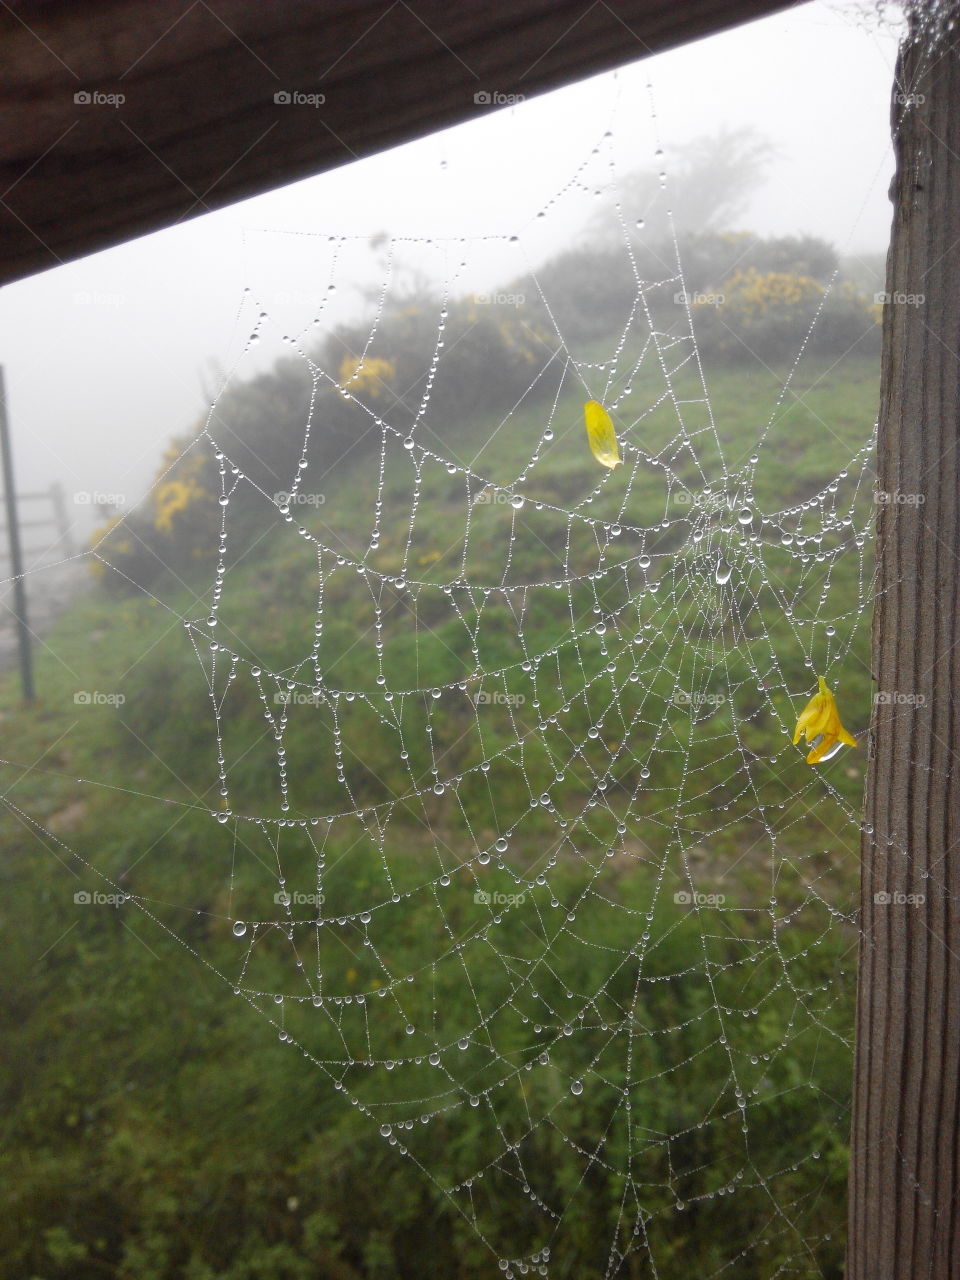 Spider web of water. Photo taken in covadonga(Spain)